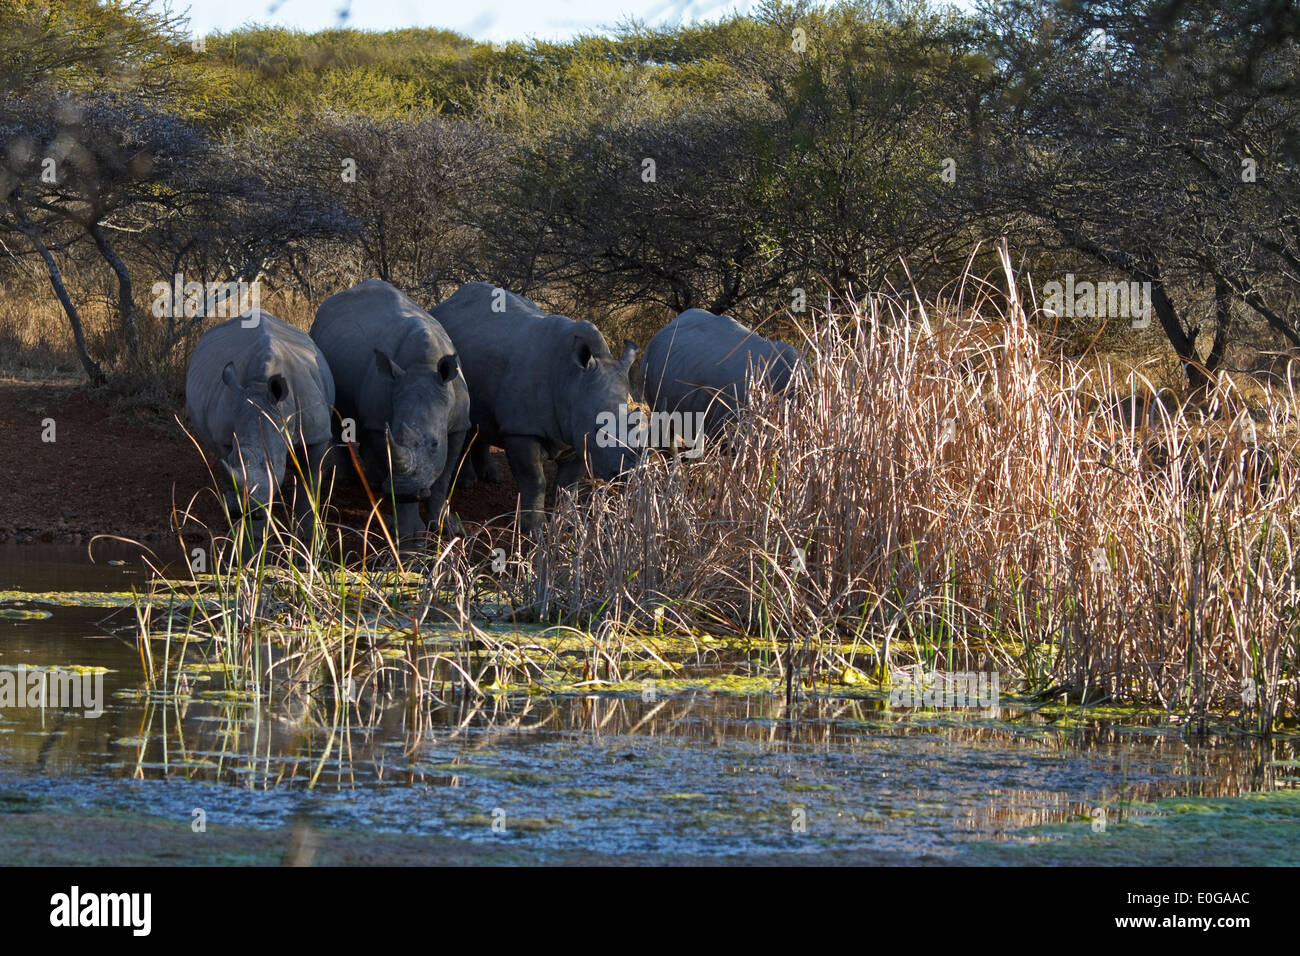 Four White Rhinoceroses at a waterhole drinking, Polokwane game reserve, Limpopo, Stock Photo